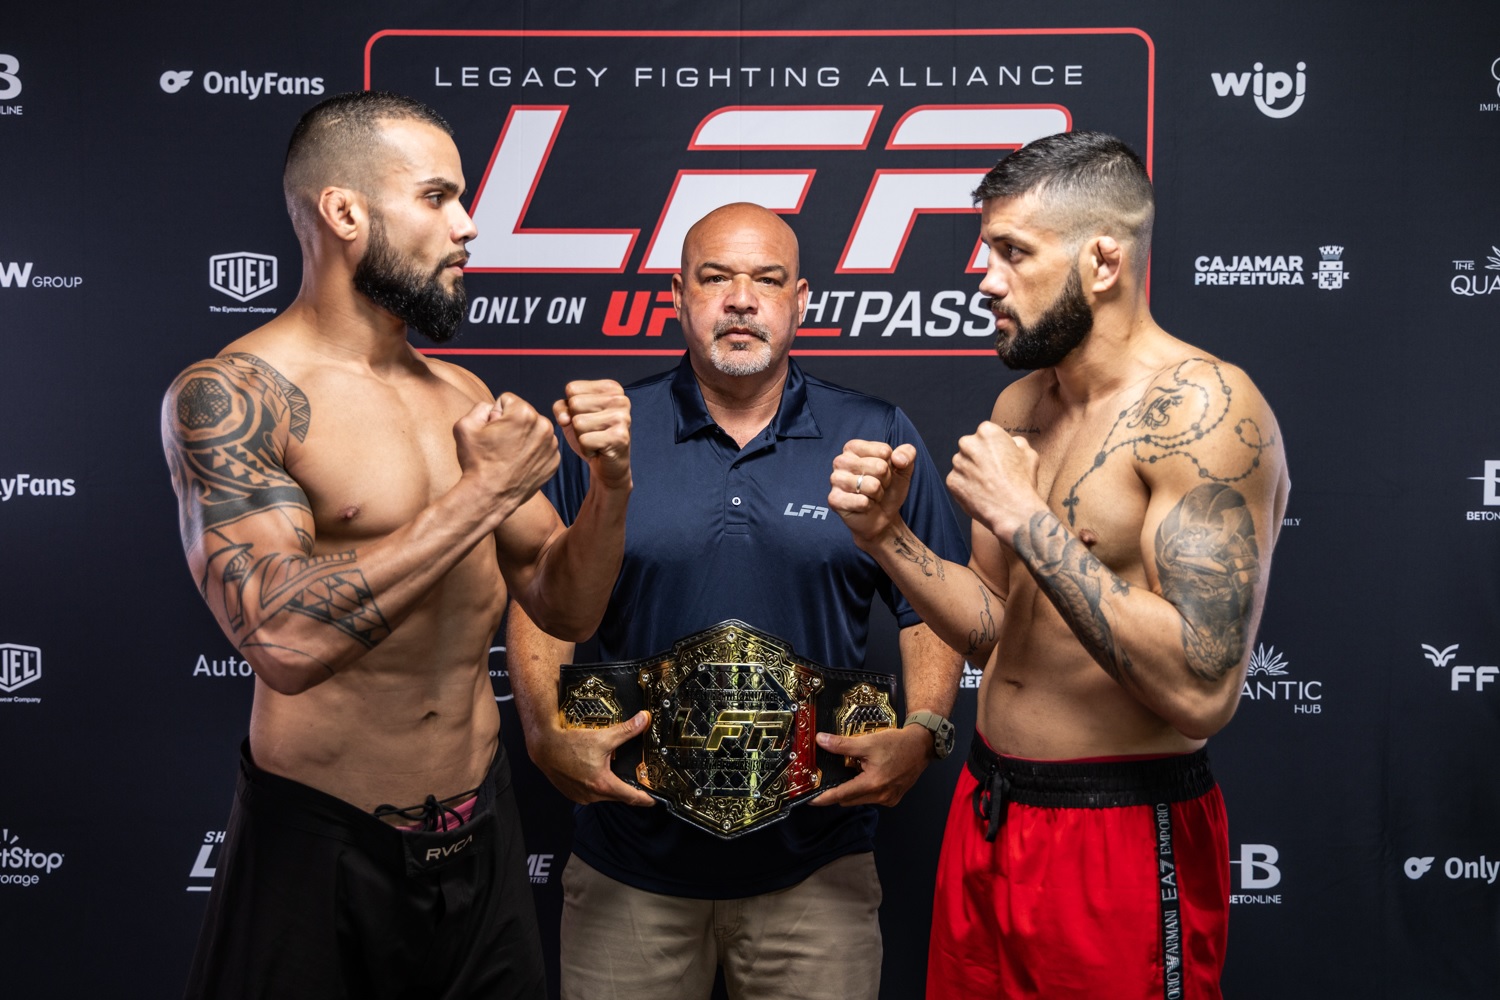 LFA 166 Weigh-In Results